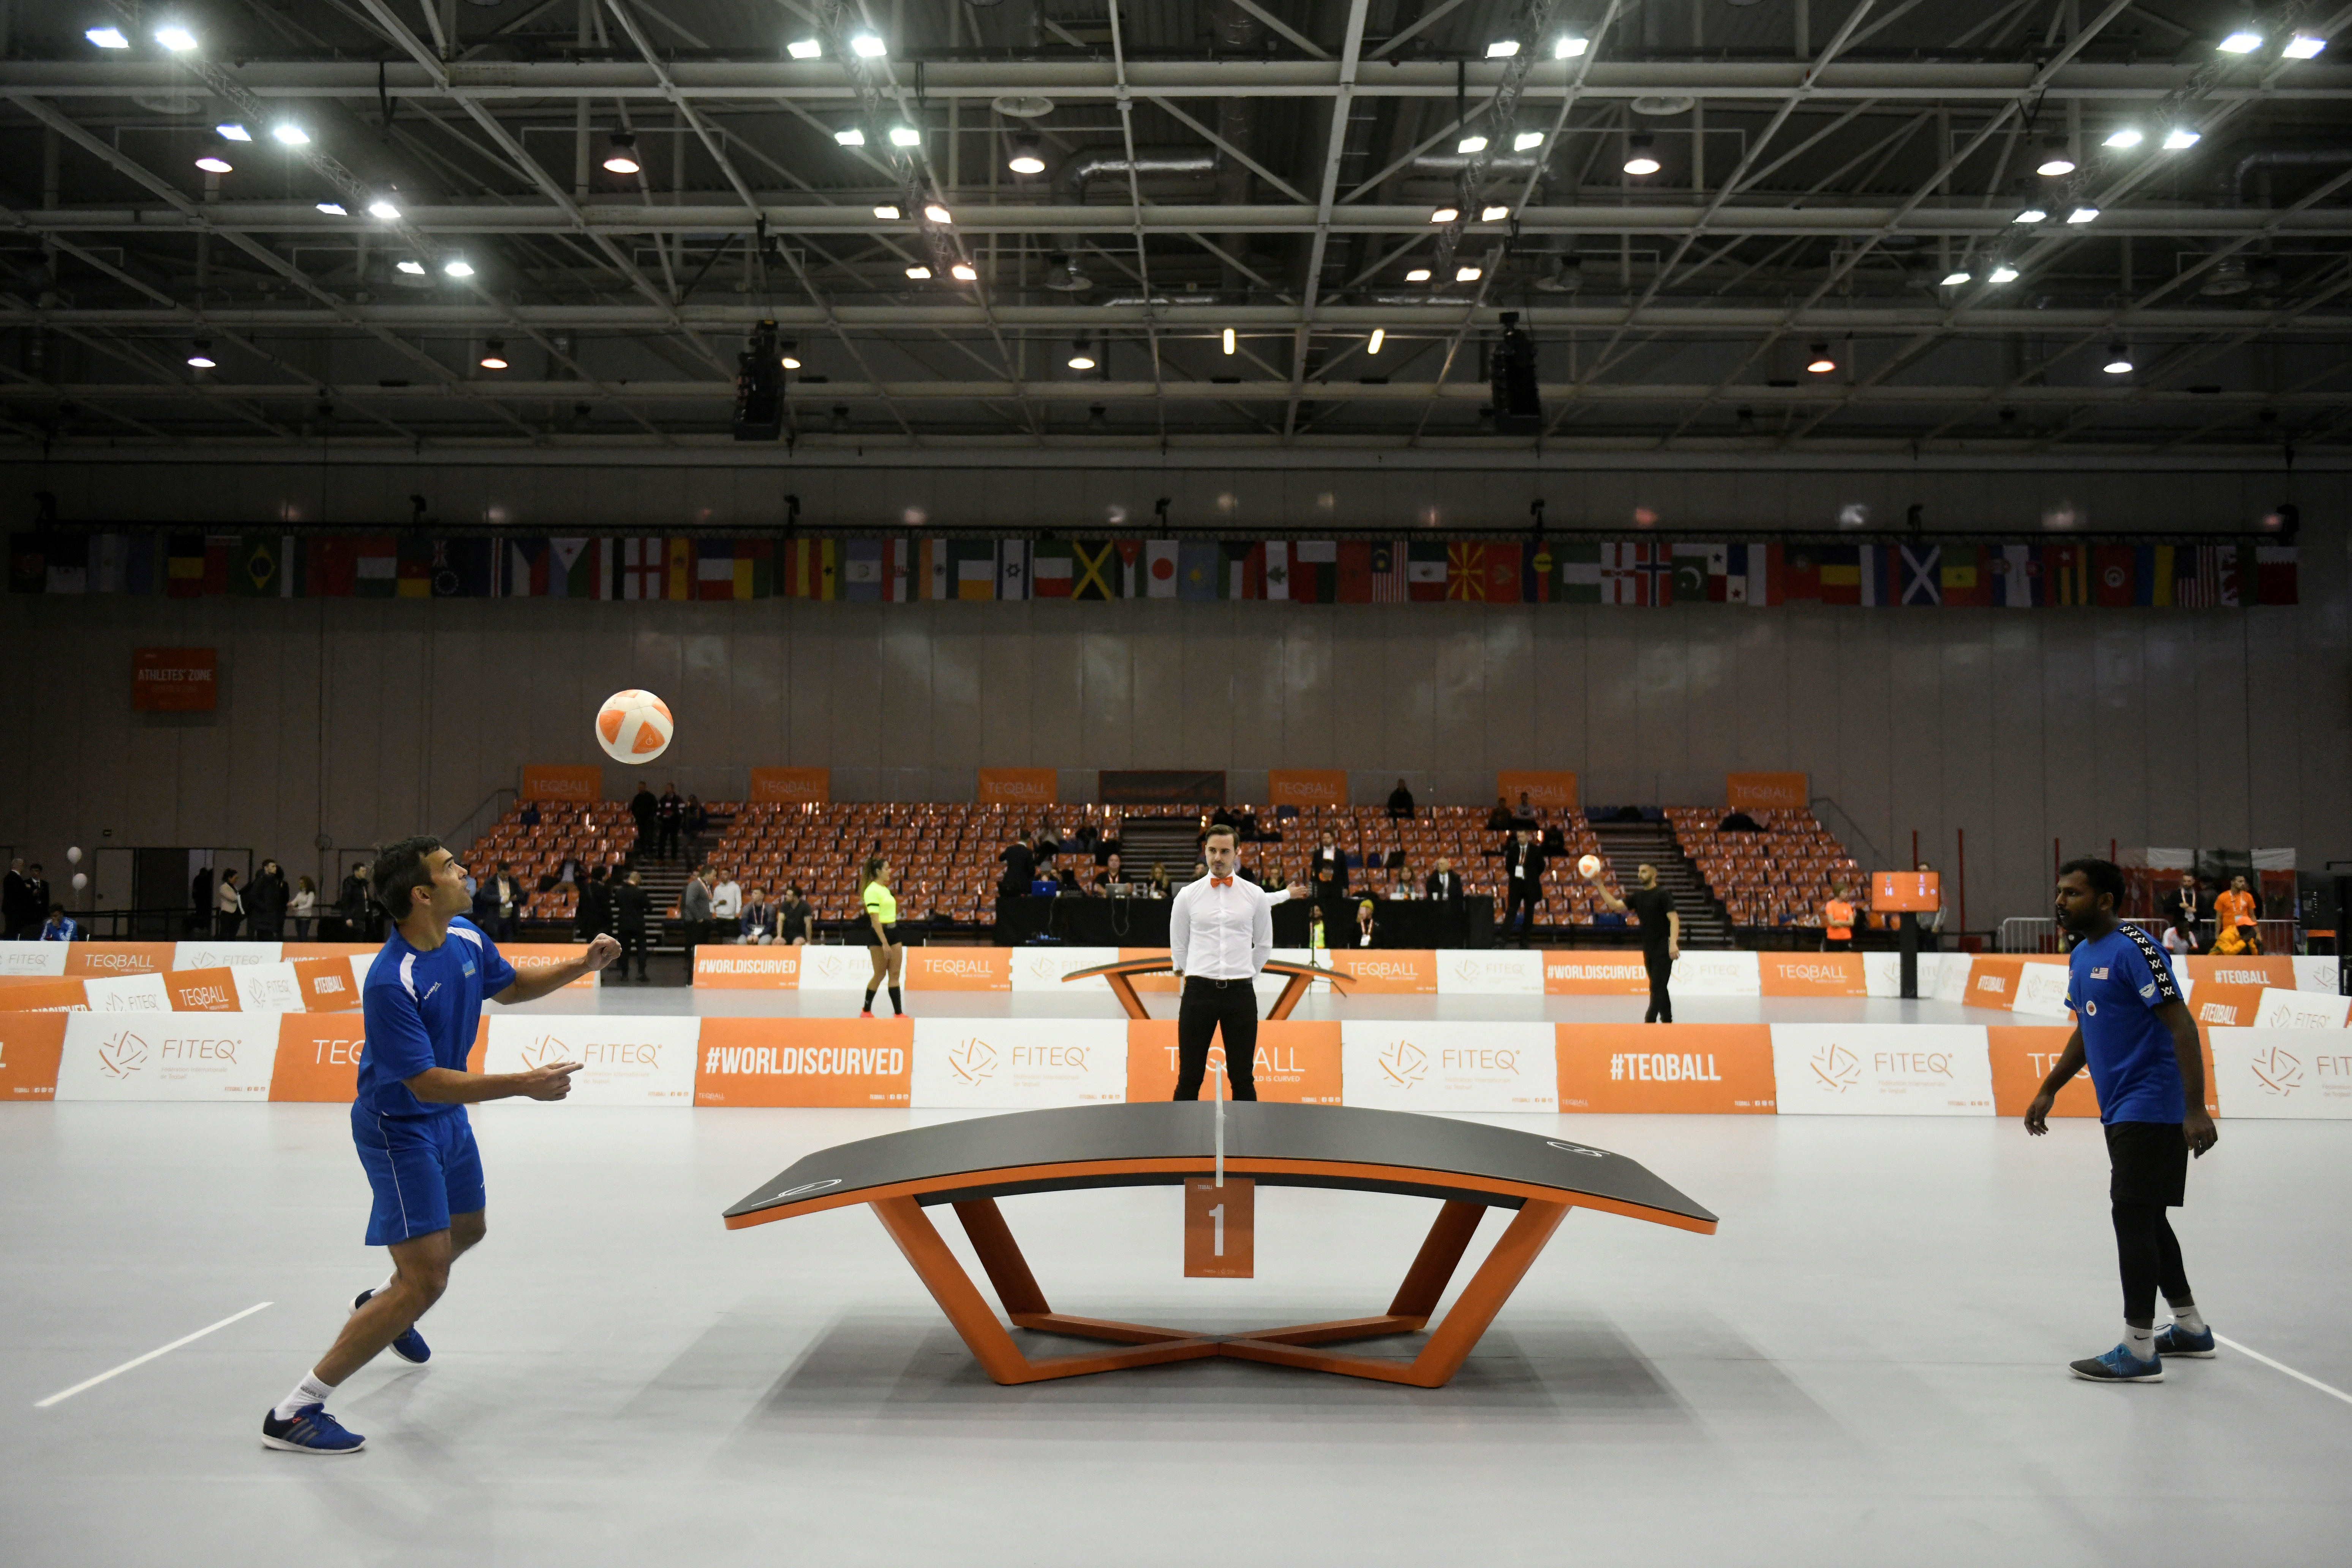 If you build it, they will play: teqball increases outreach through youth sport partnership in Los Angeles